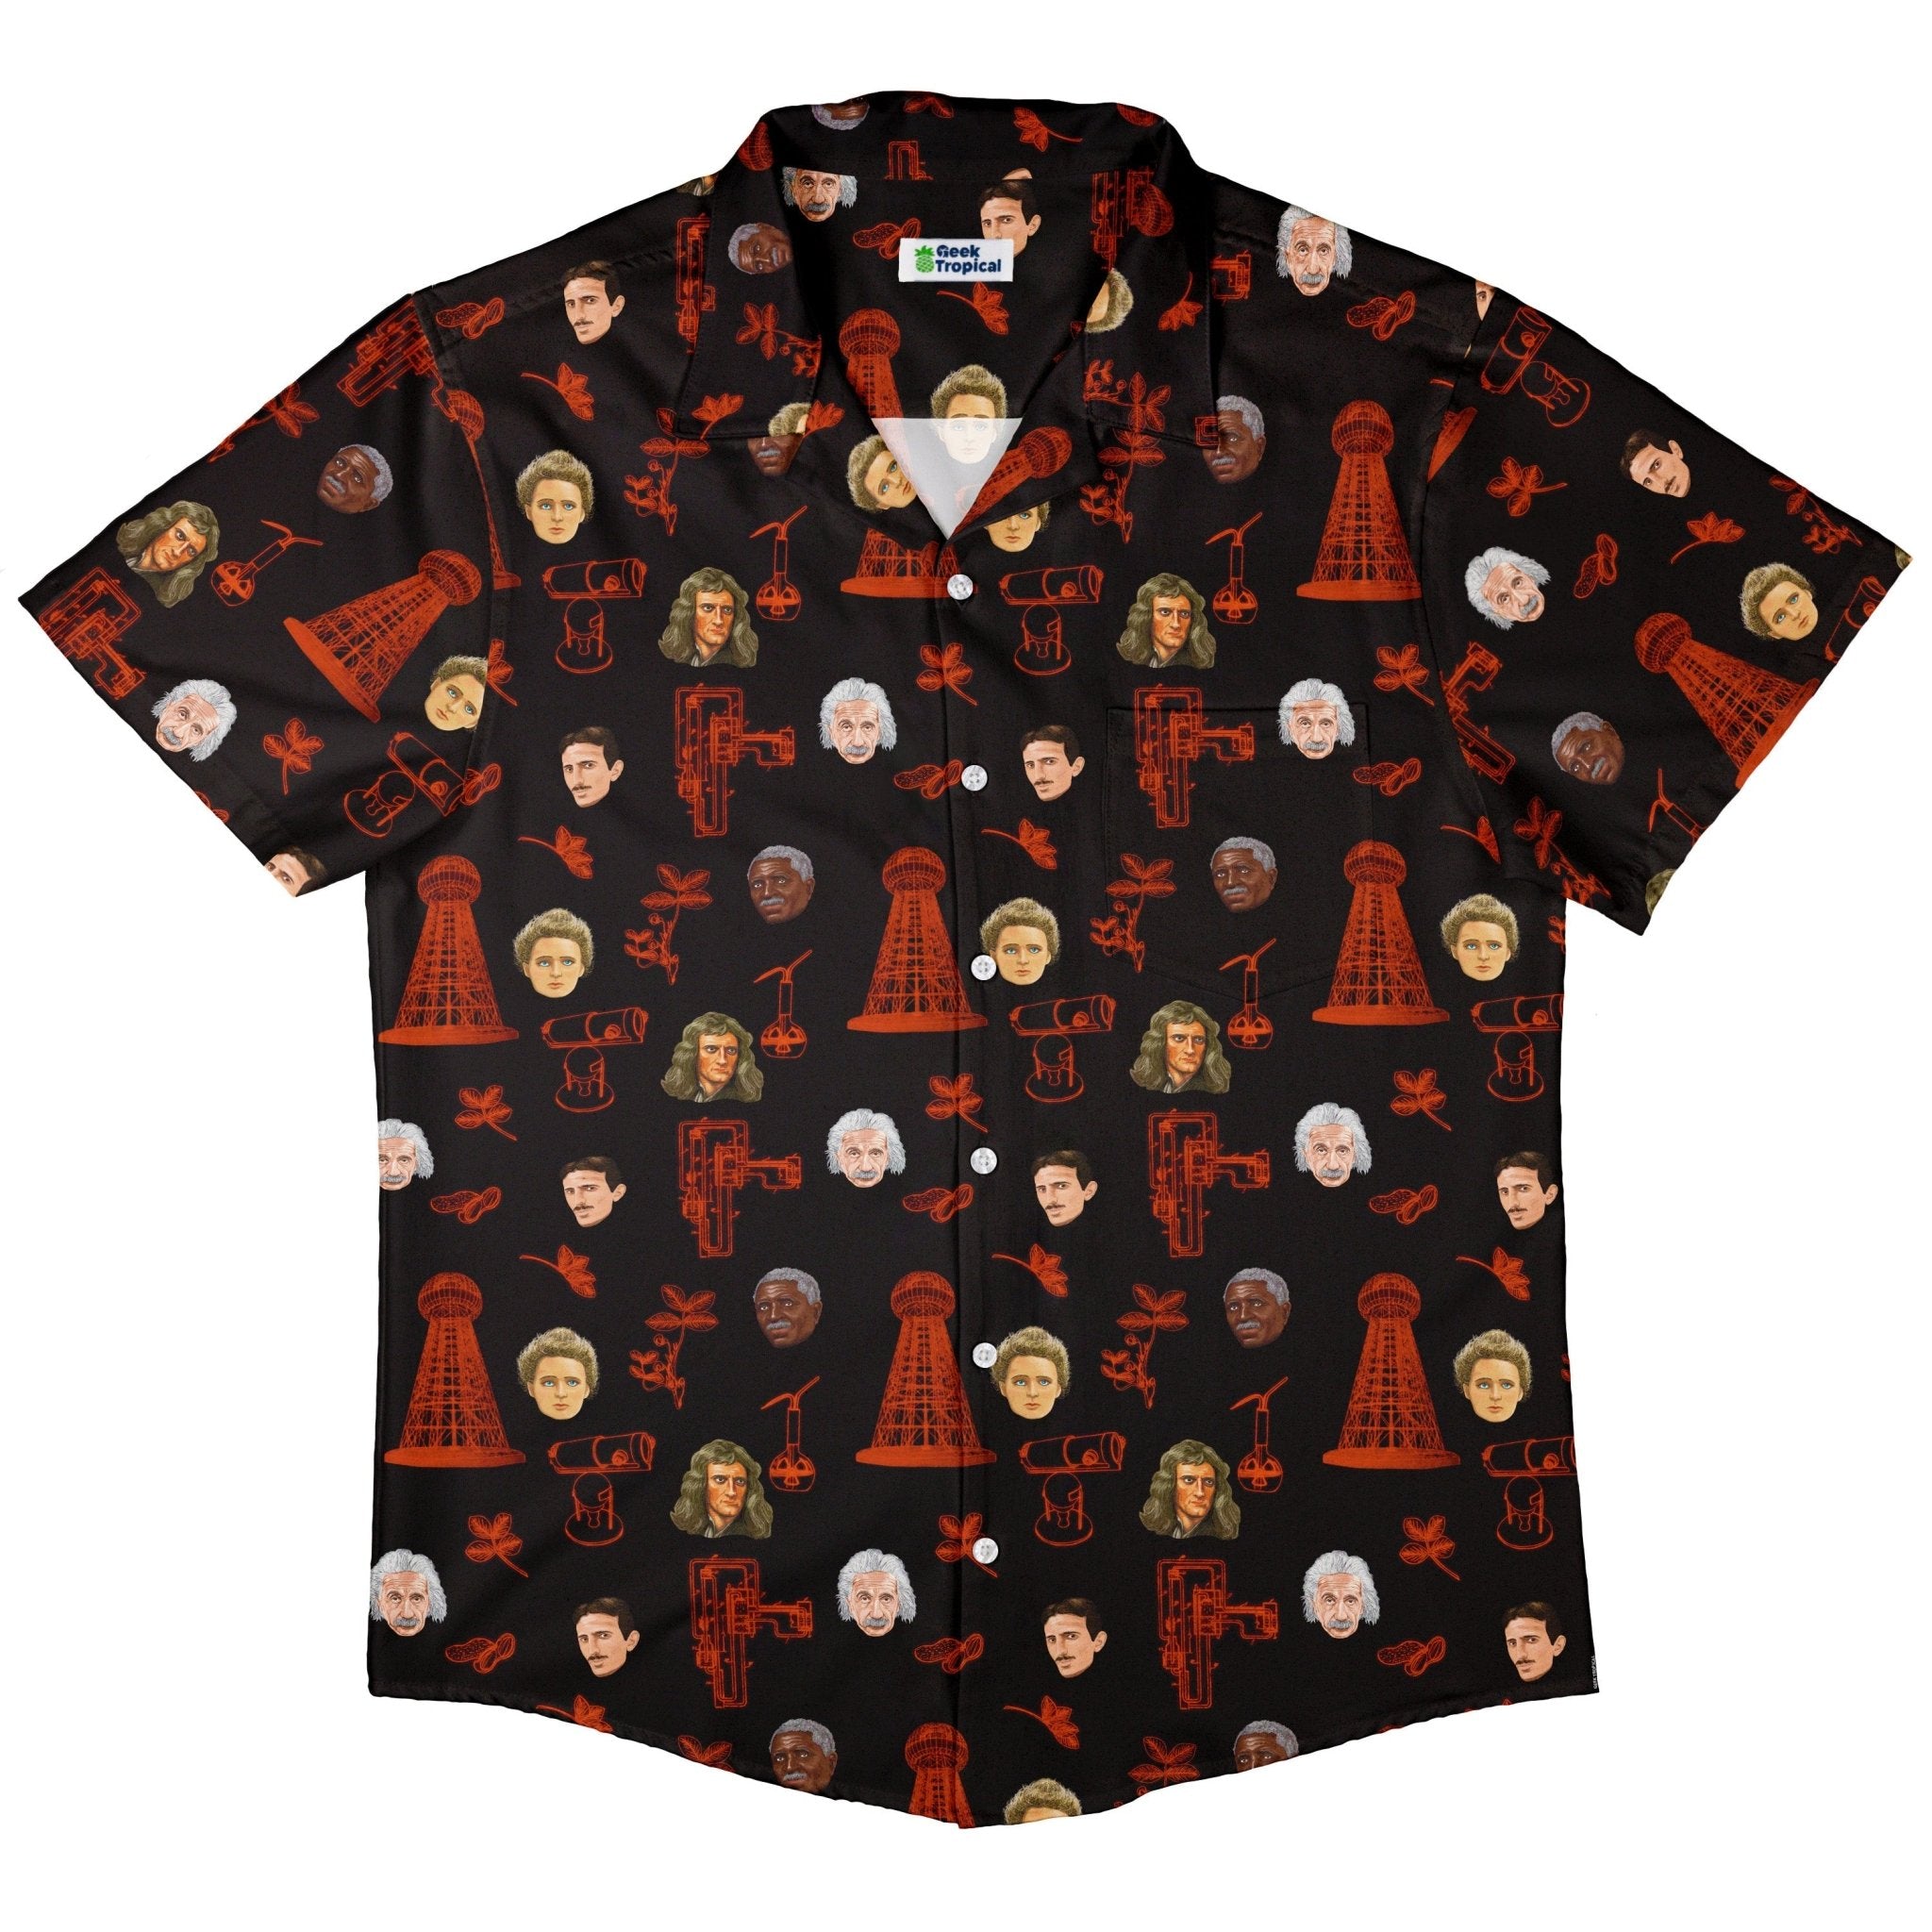 Rusty Science Legends Button Up Shirt - adult sizing - Designs by Nathan - science print